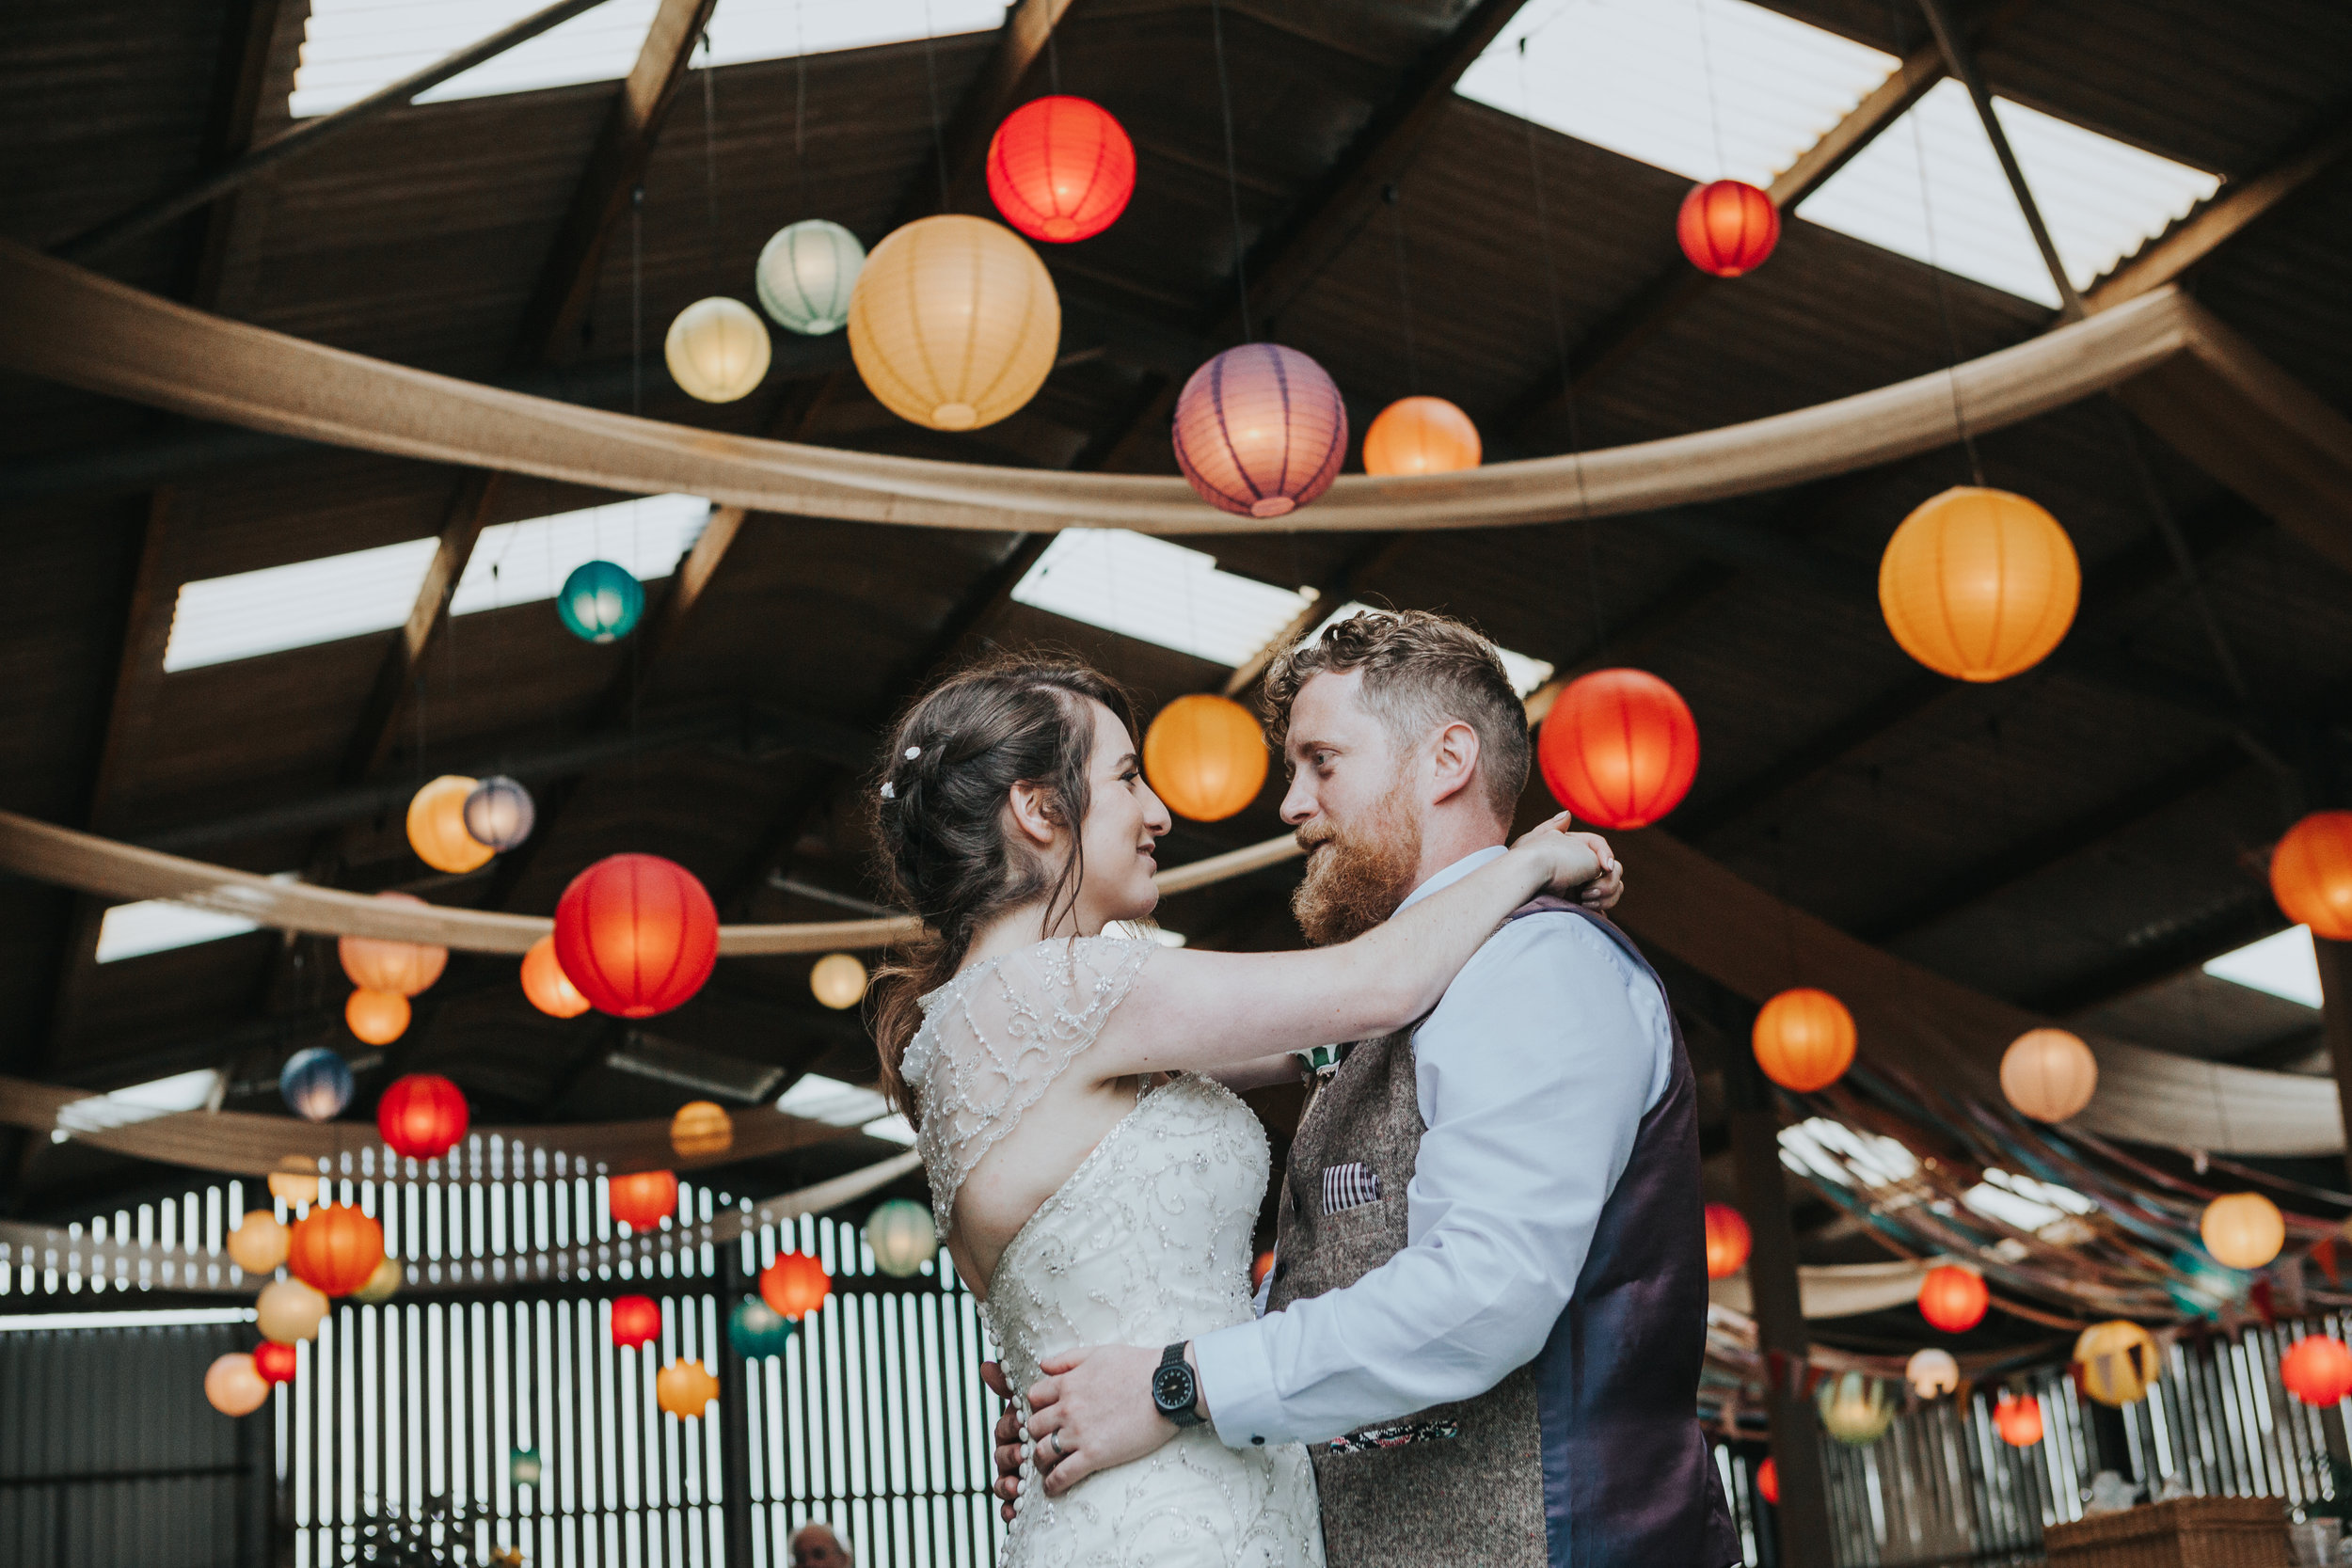  Rachel and Matthew stand together in front of room full of colourful lanterns  